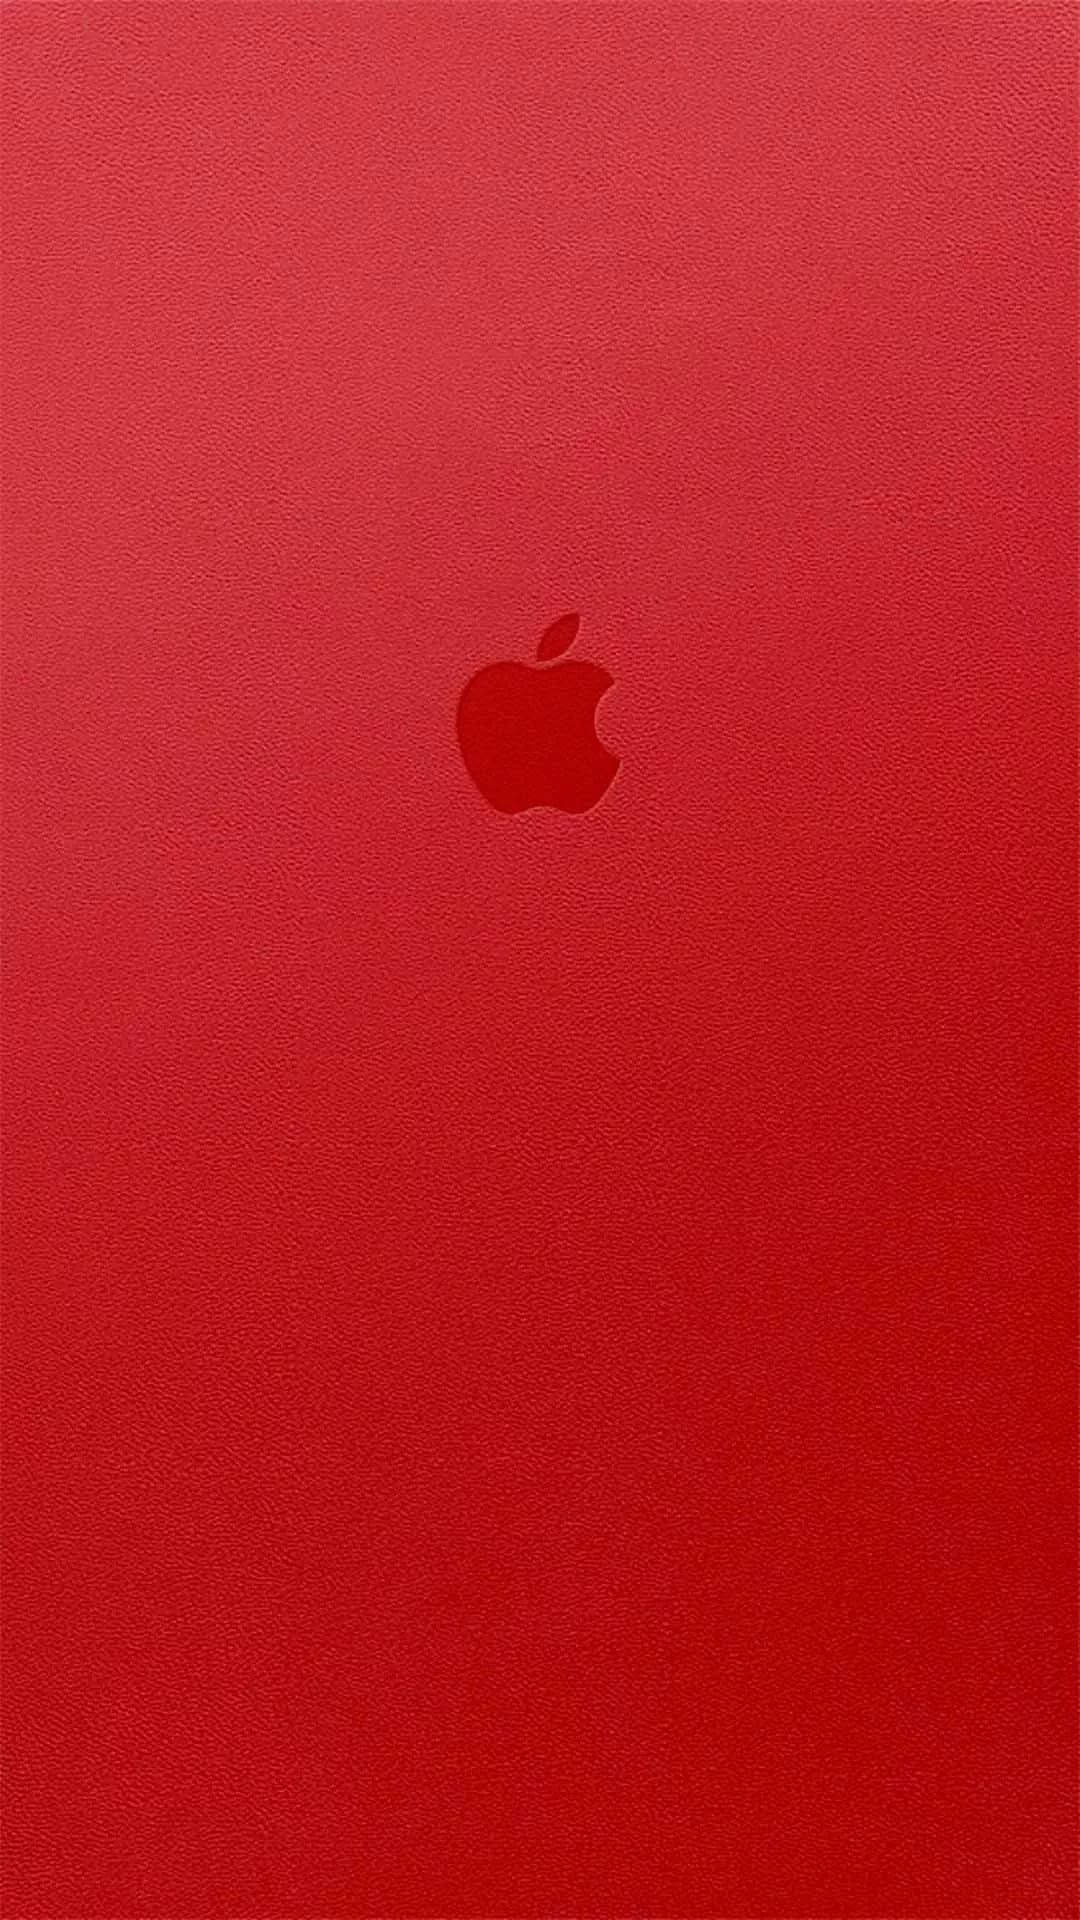 Pure Red Apple Logo Background